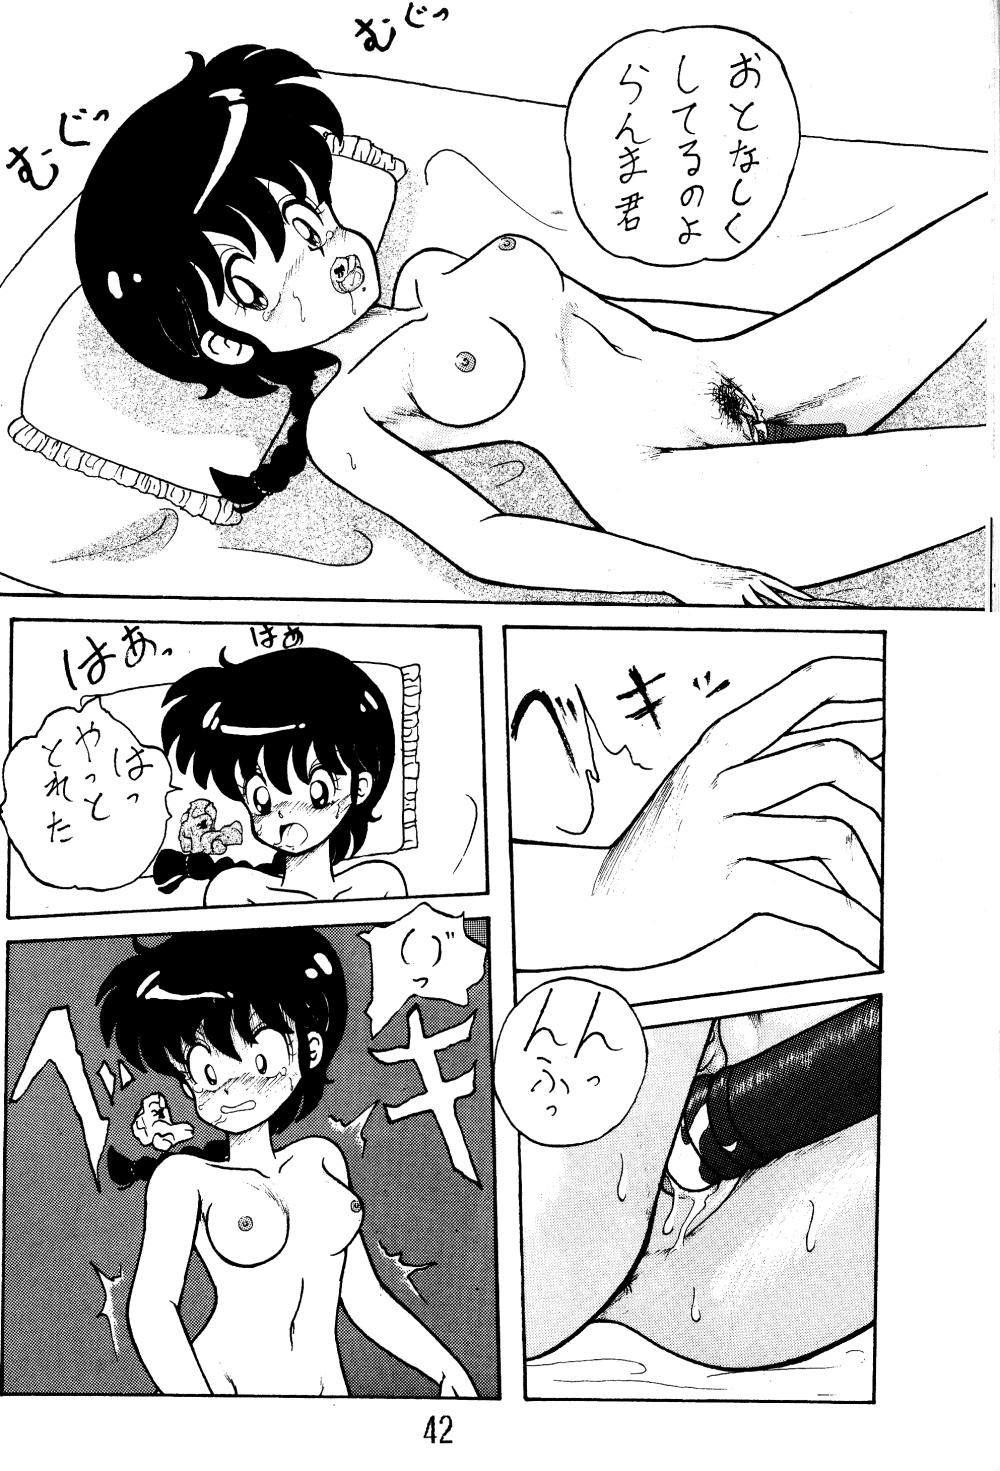 NOTORIOUS Ranma 1/2 Special 40